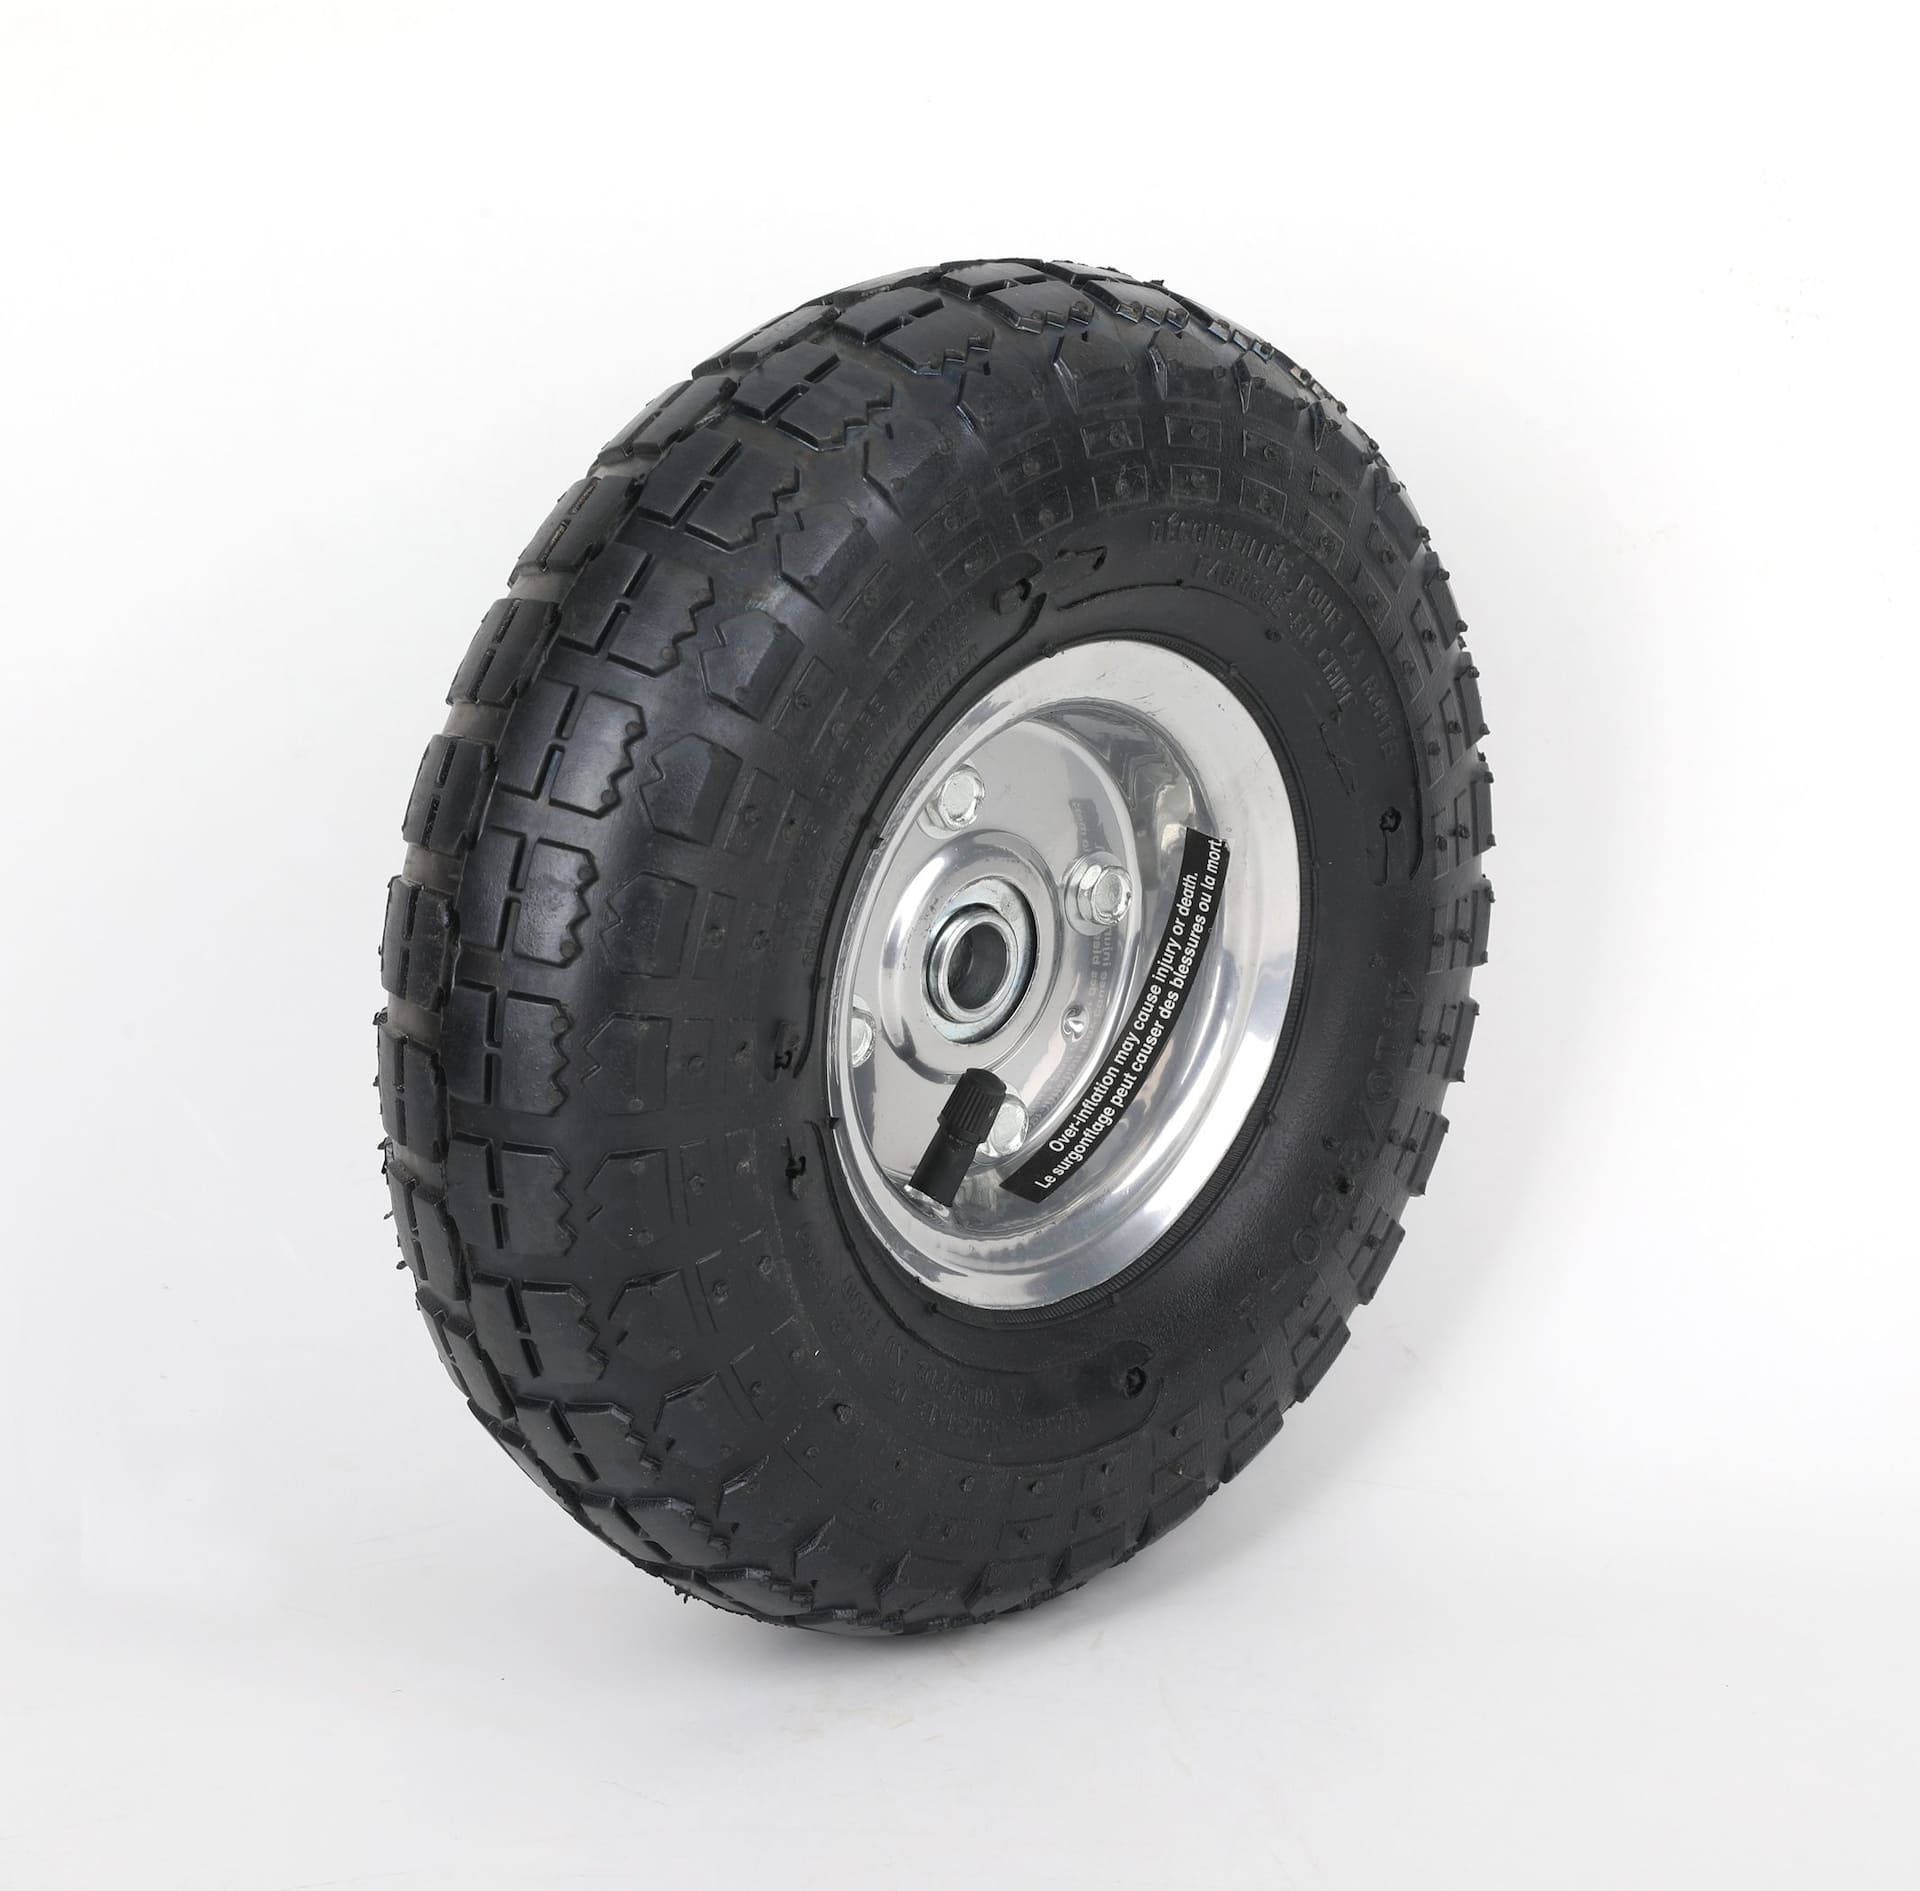 Yardworks 10-in Pneumatic Replacement Wheel/Tire Canadian Tire